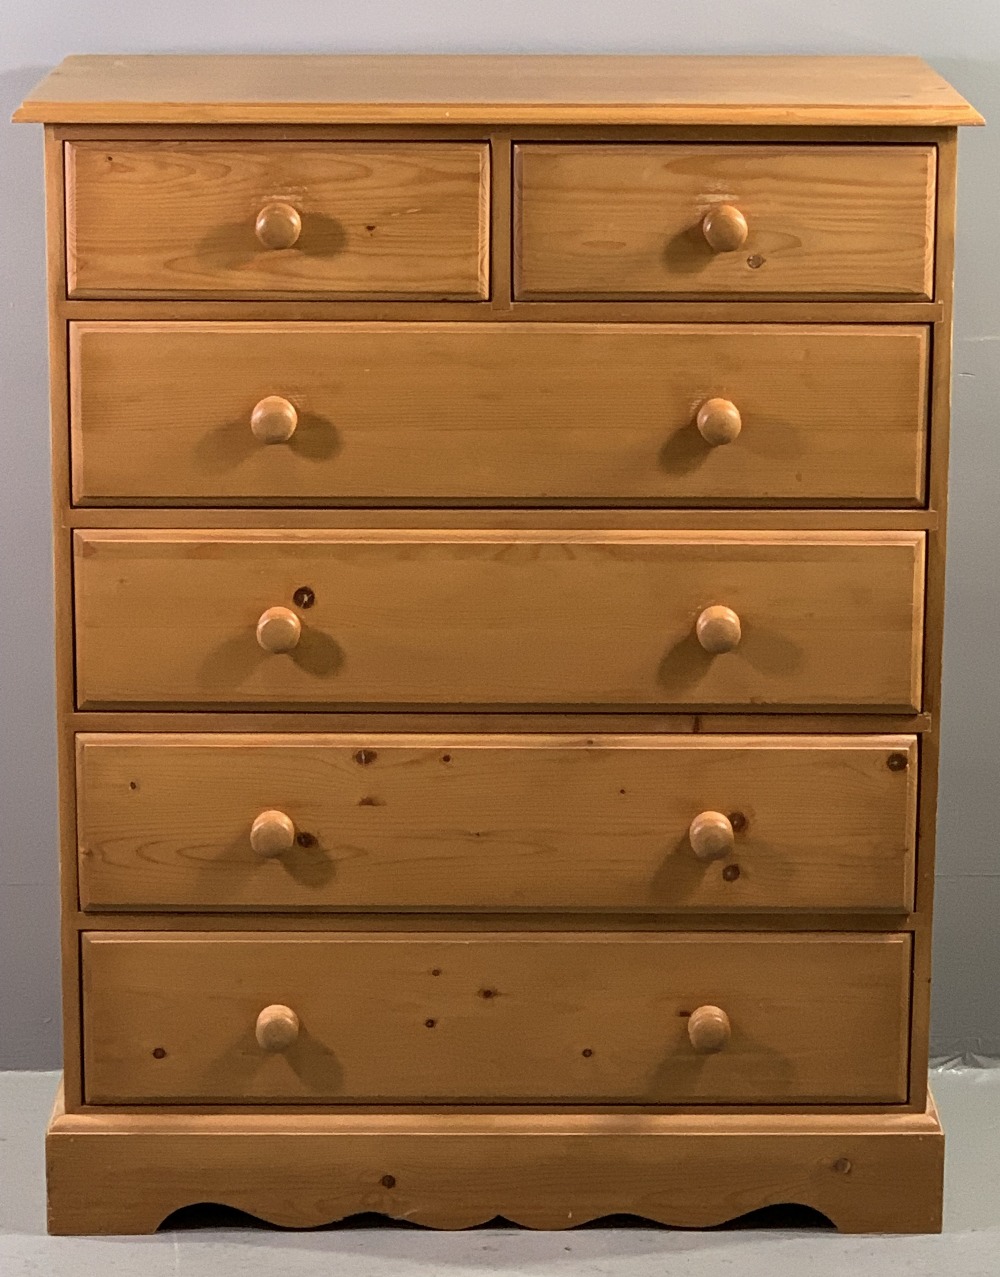 CHEST OF DRAWERS - modern pine with two over four drawers, 115cms H, 93cms W, 47cms D